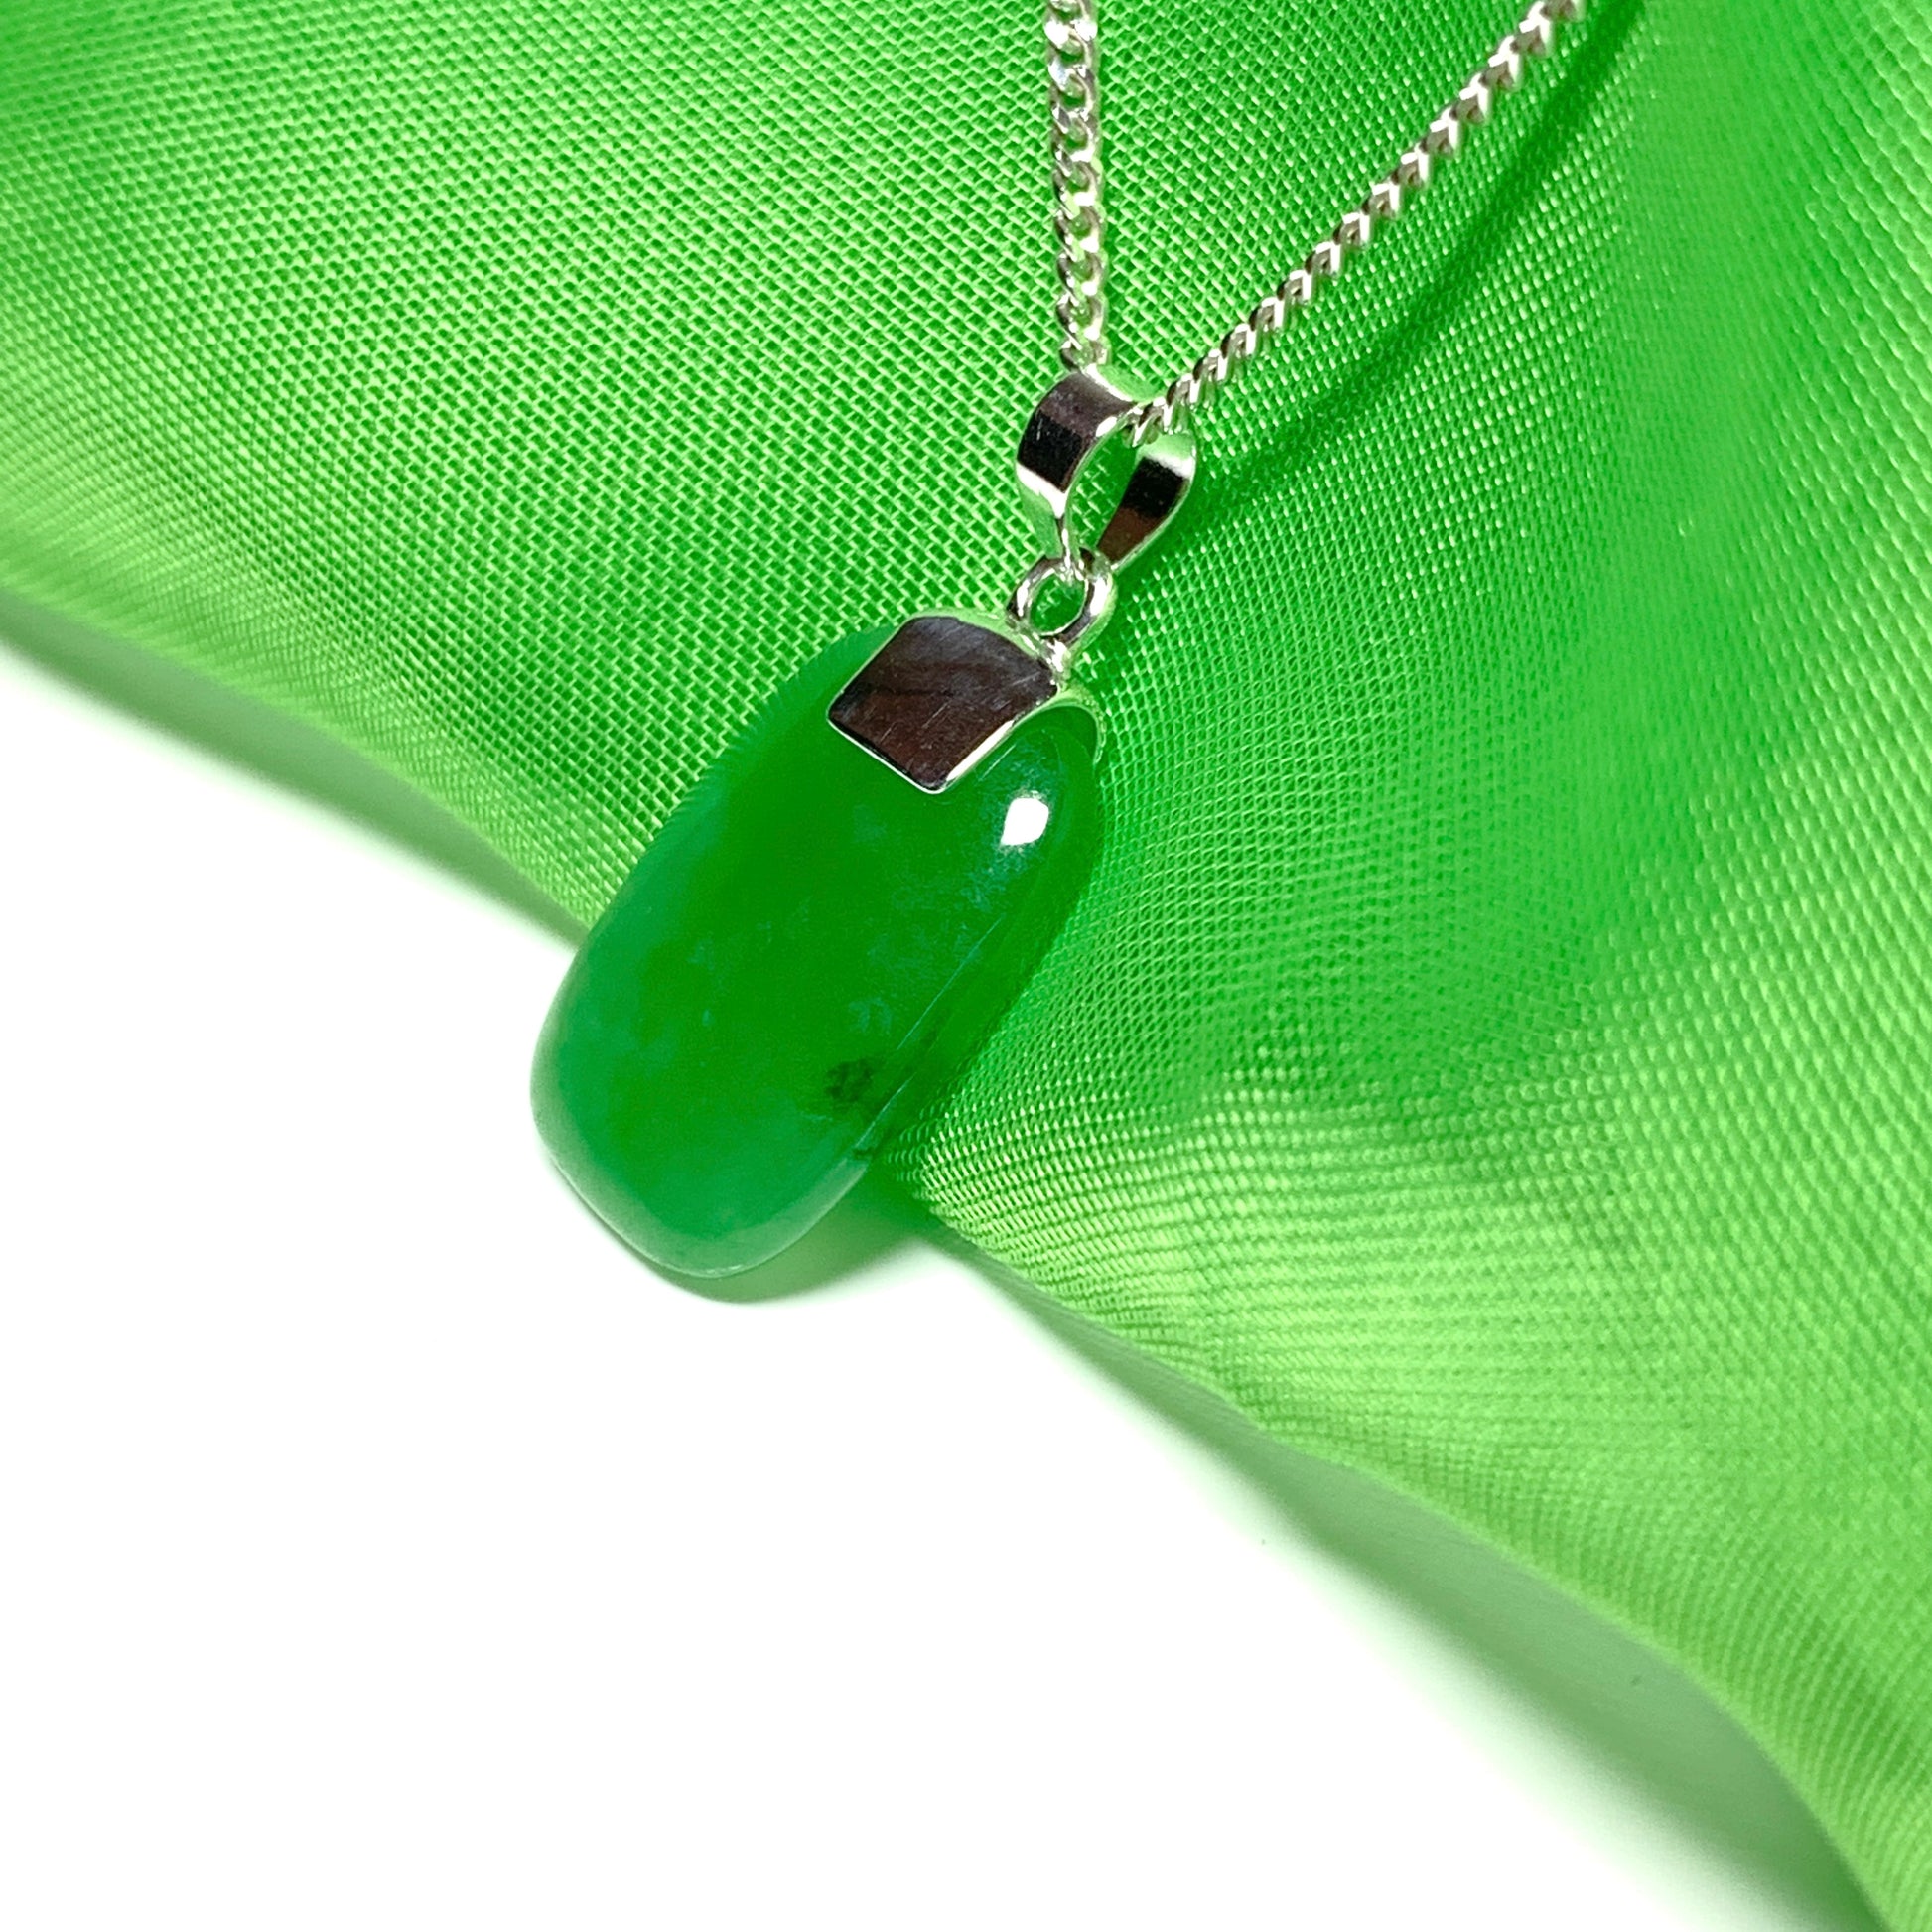 Green jade cushion shaped silver necklace pendant